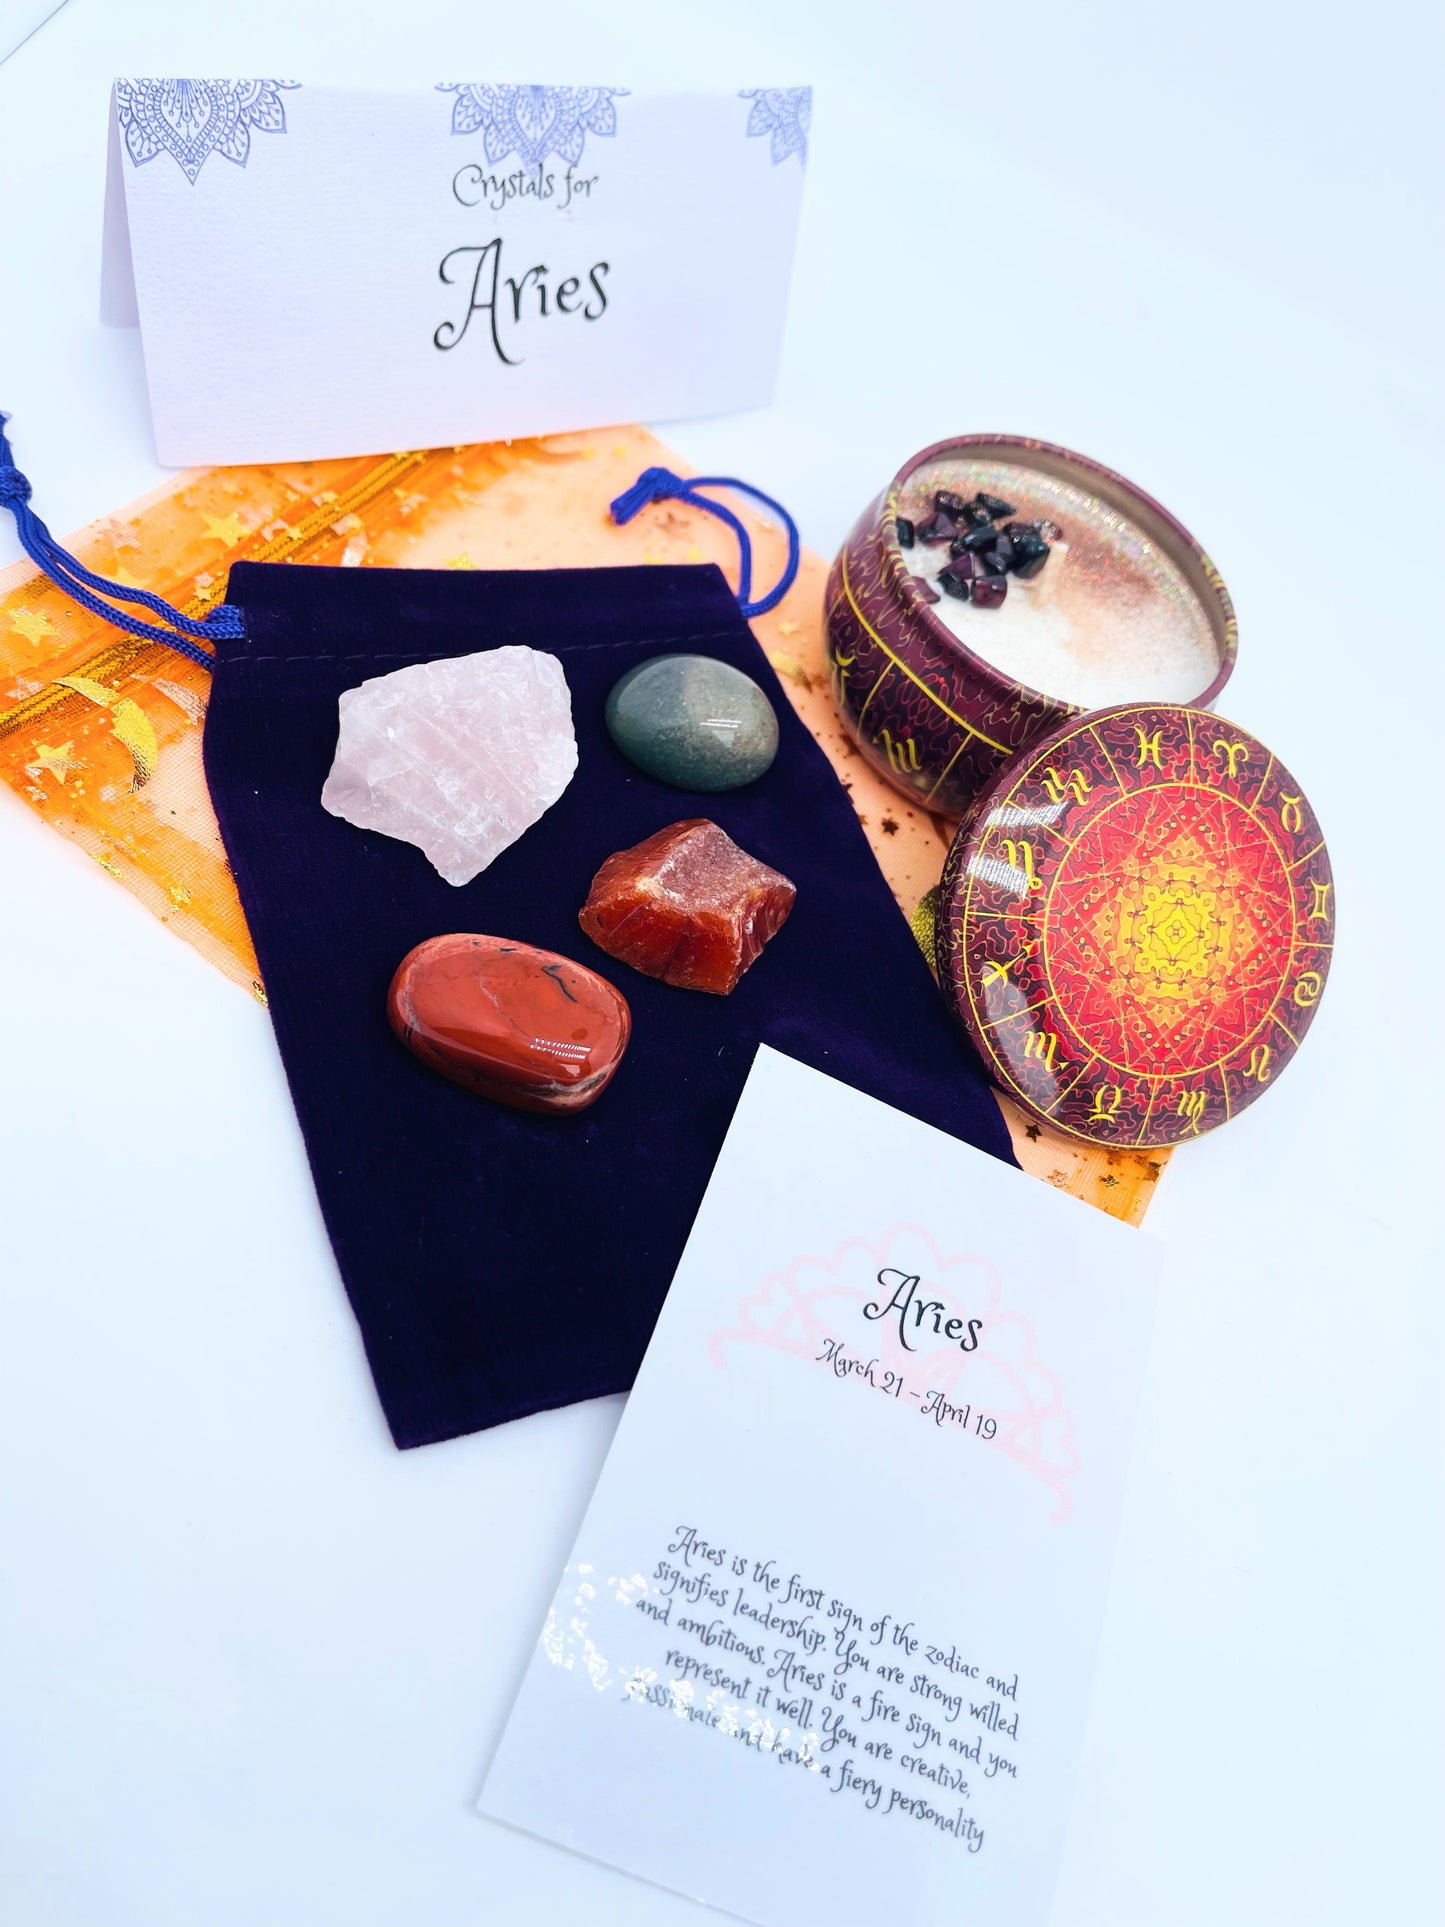 Aries zodiac candle gift set with candle and four crystals for this sign sitting on a velvet bag.